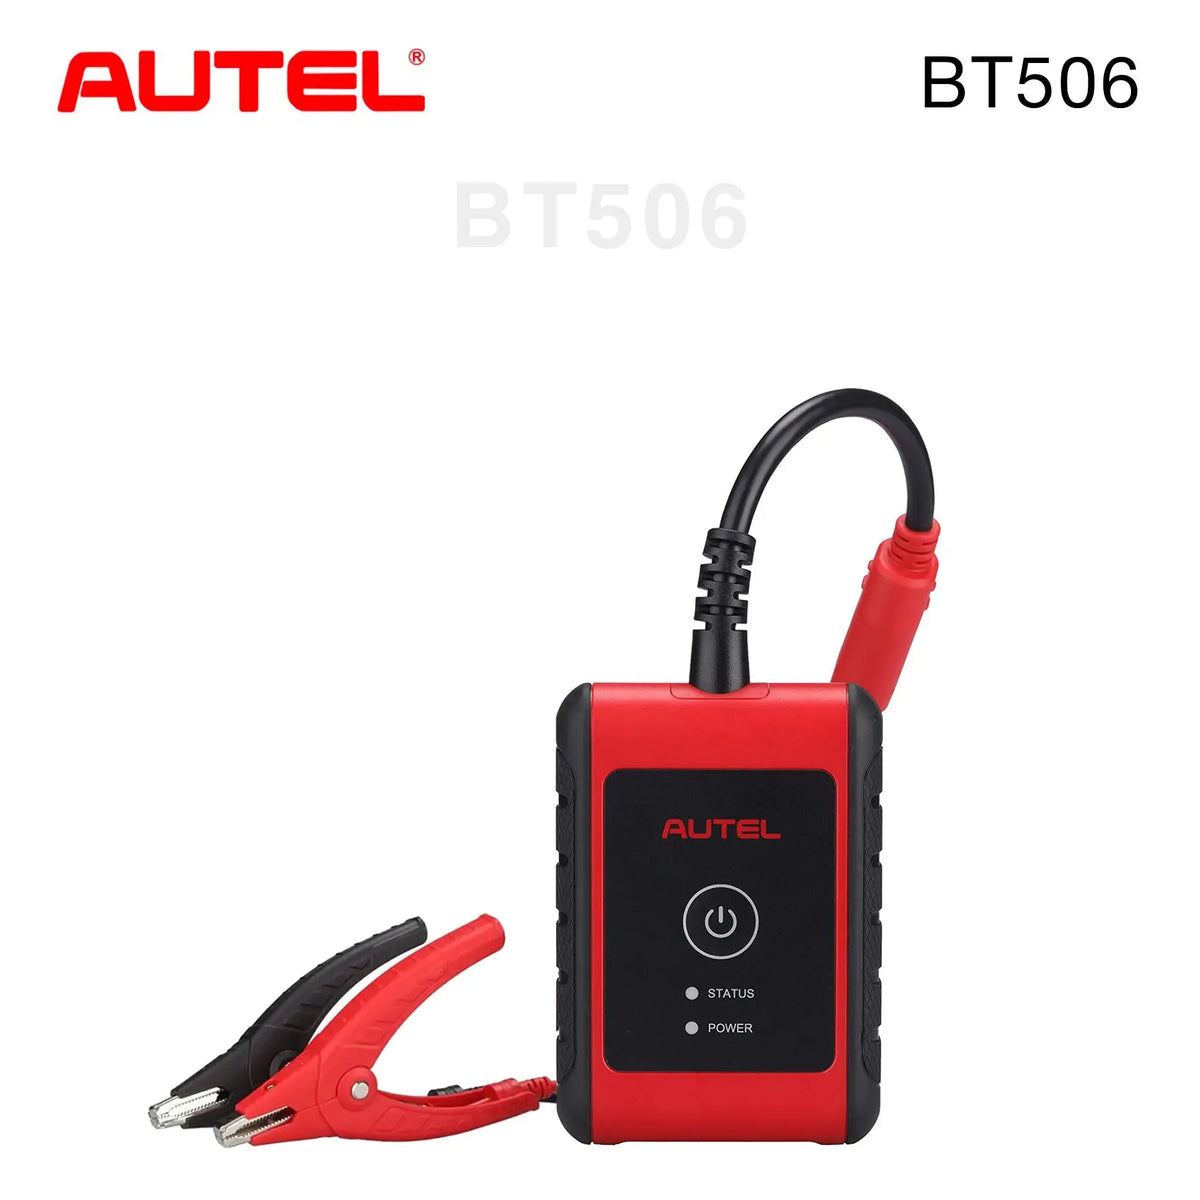 Autel BT506 Maxibas Car Battery and Electrical System Analysis Tool Autel